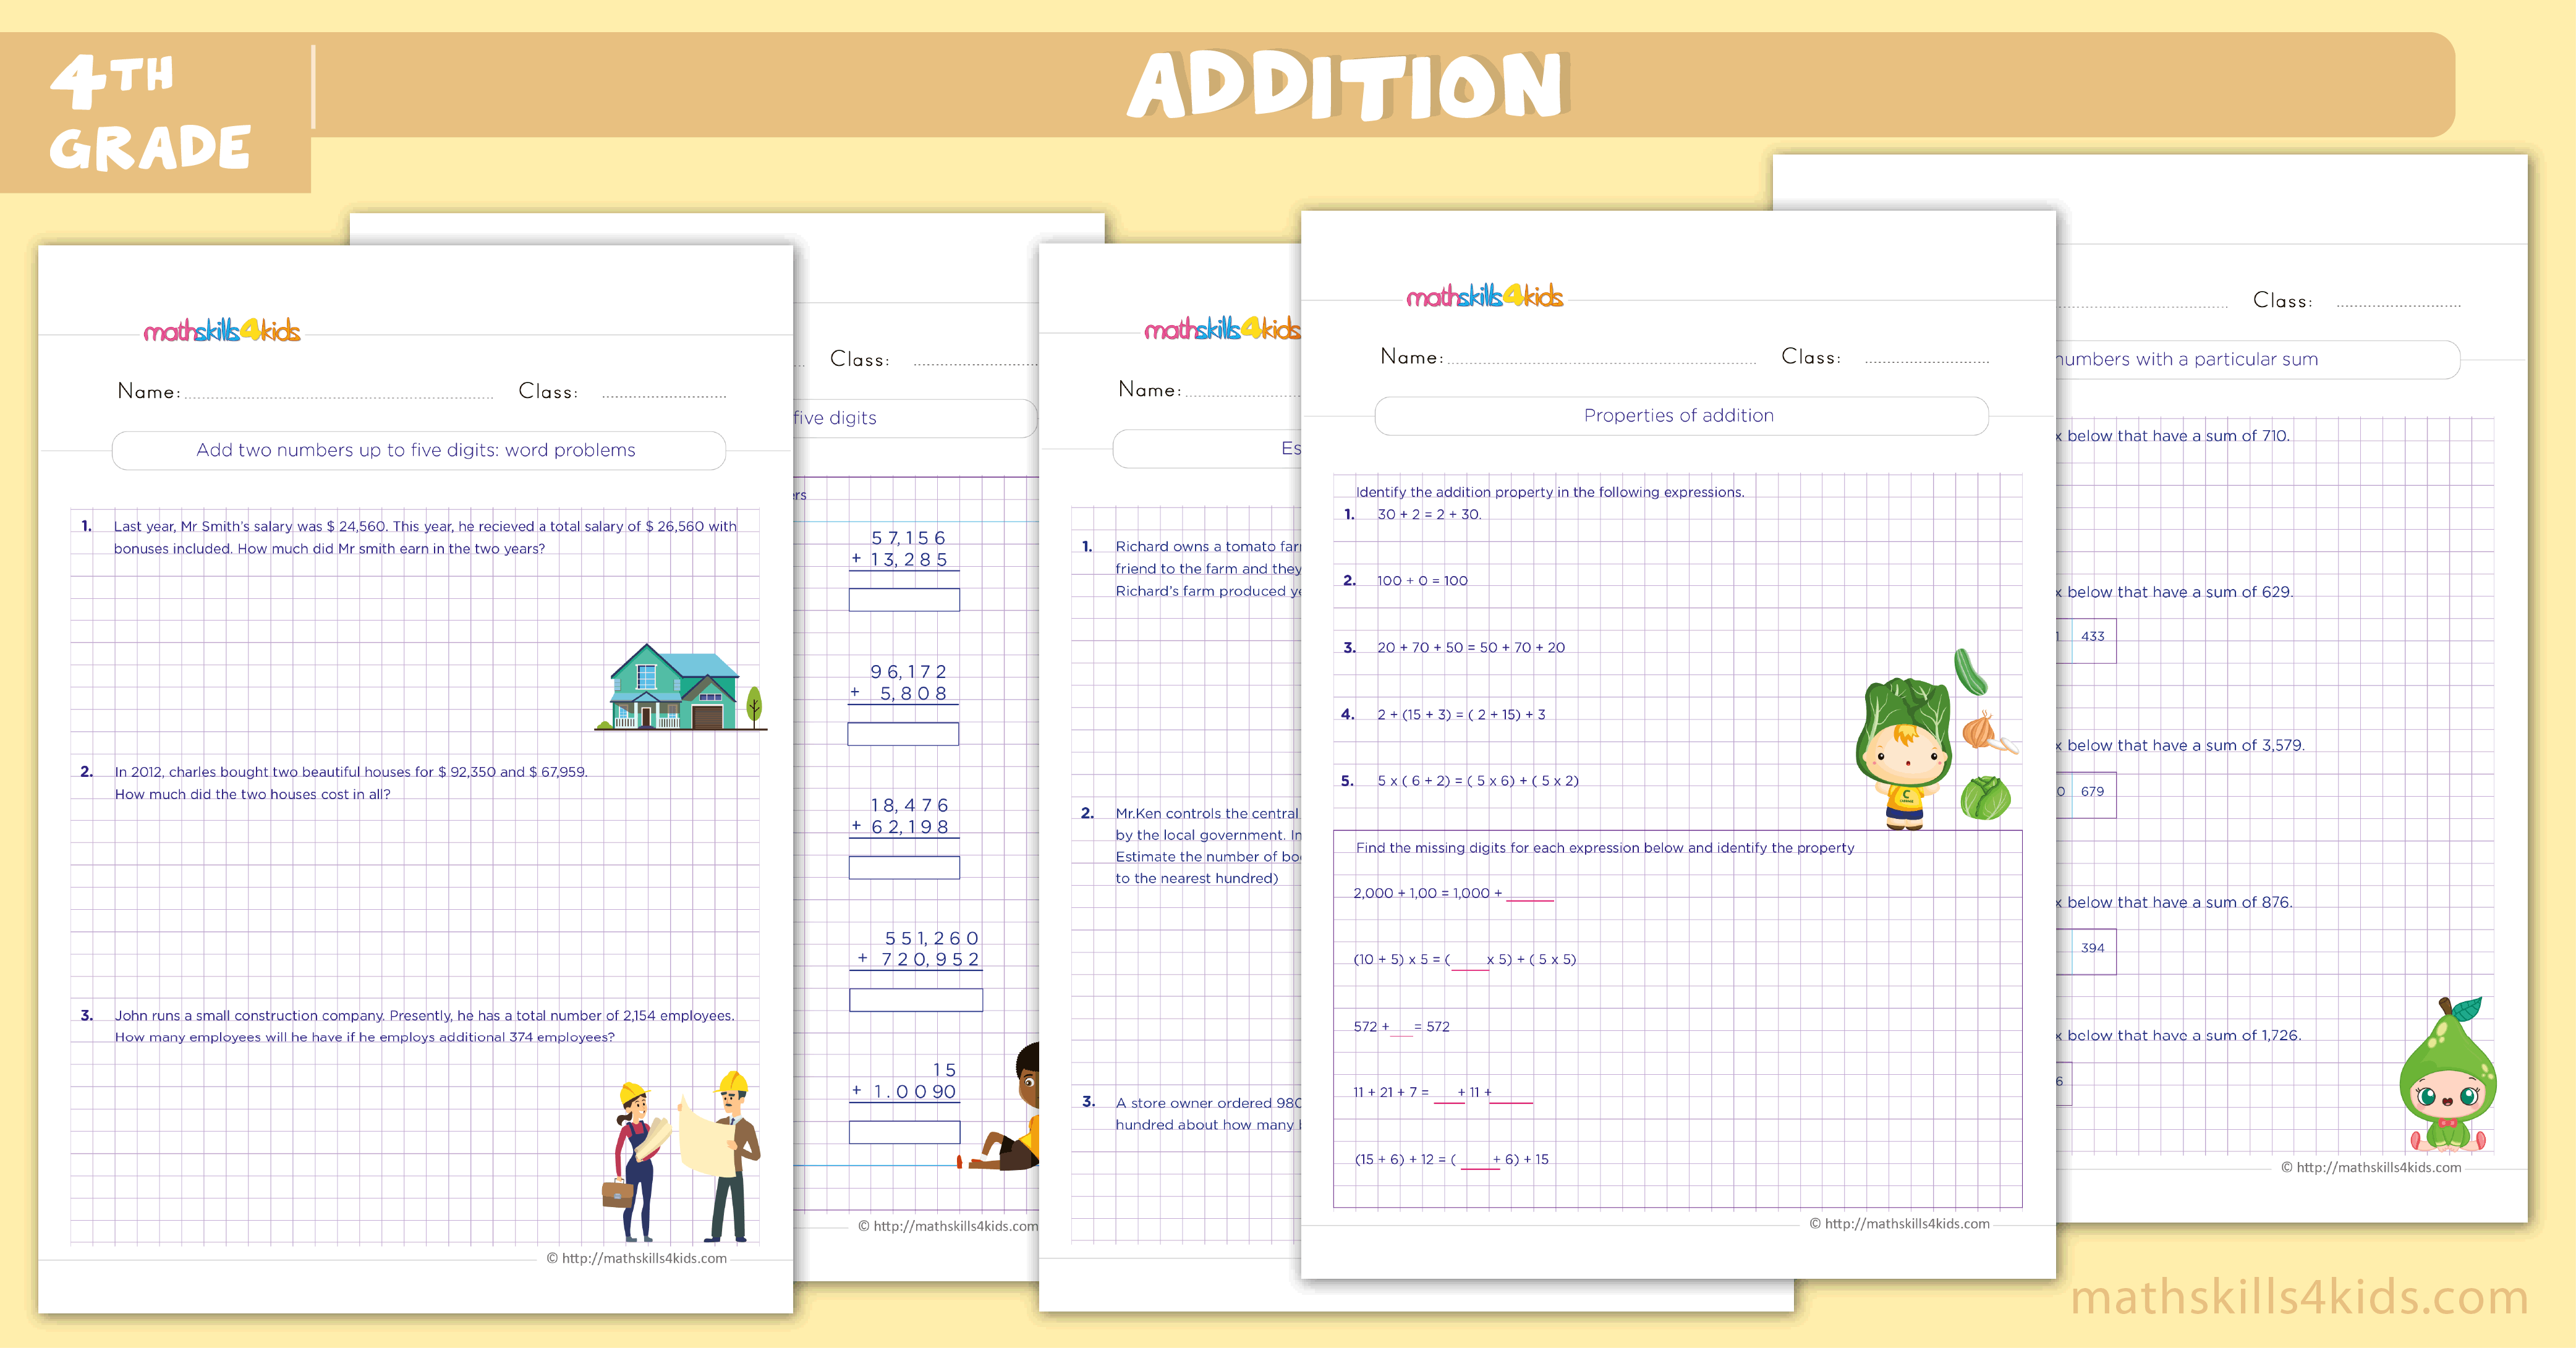 Addition Worksheets for Grade 4 PDF - Addition Sums for Class 4 with Answers